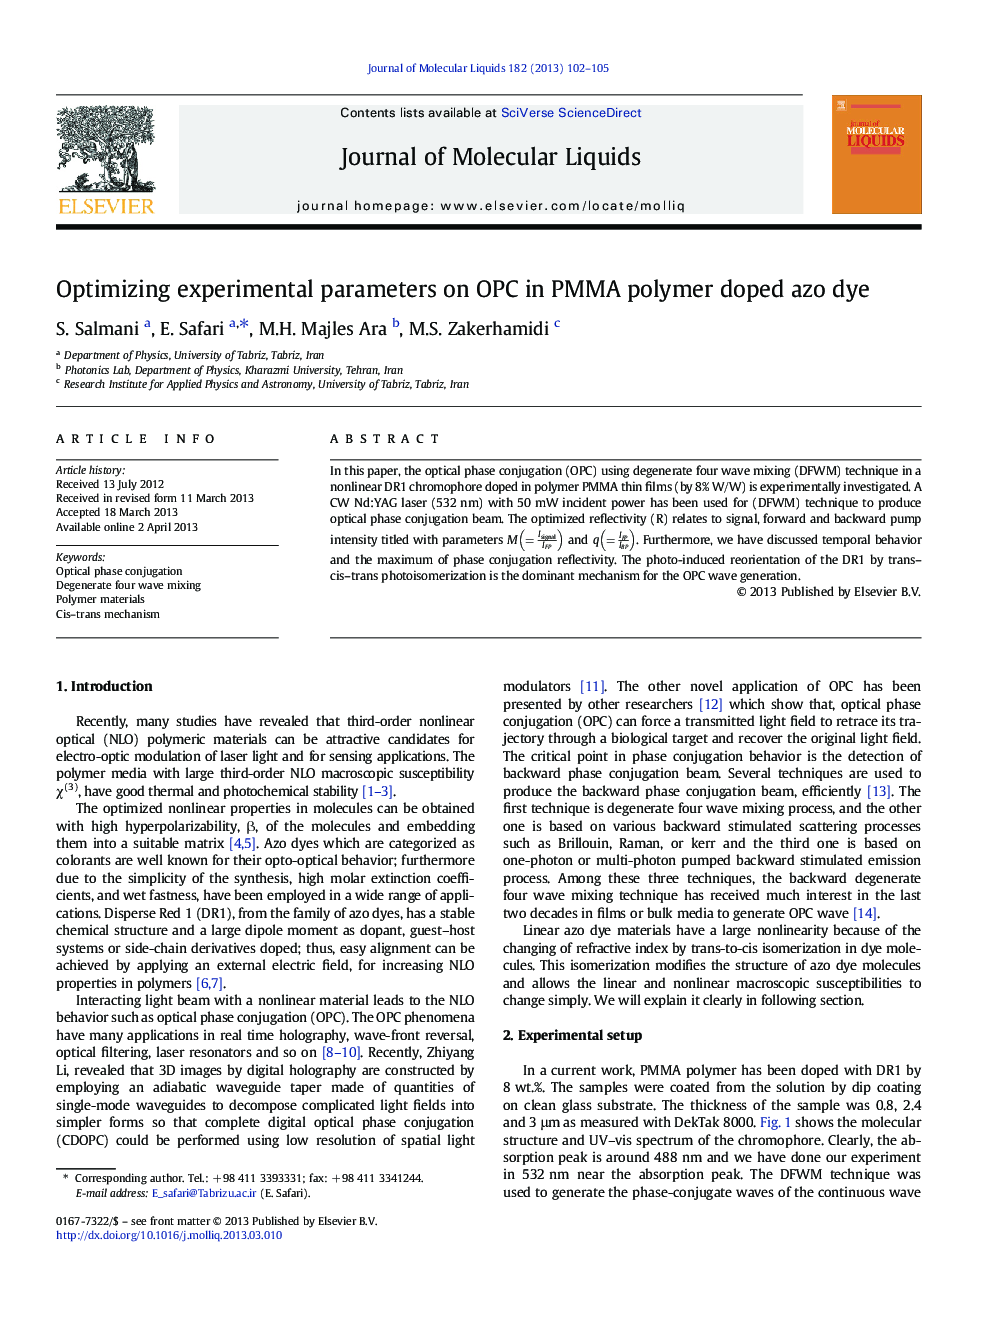 Optimizing experimental parameters on OPC in PMMA polymer doped azo dye